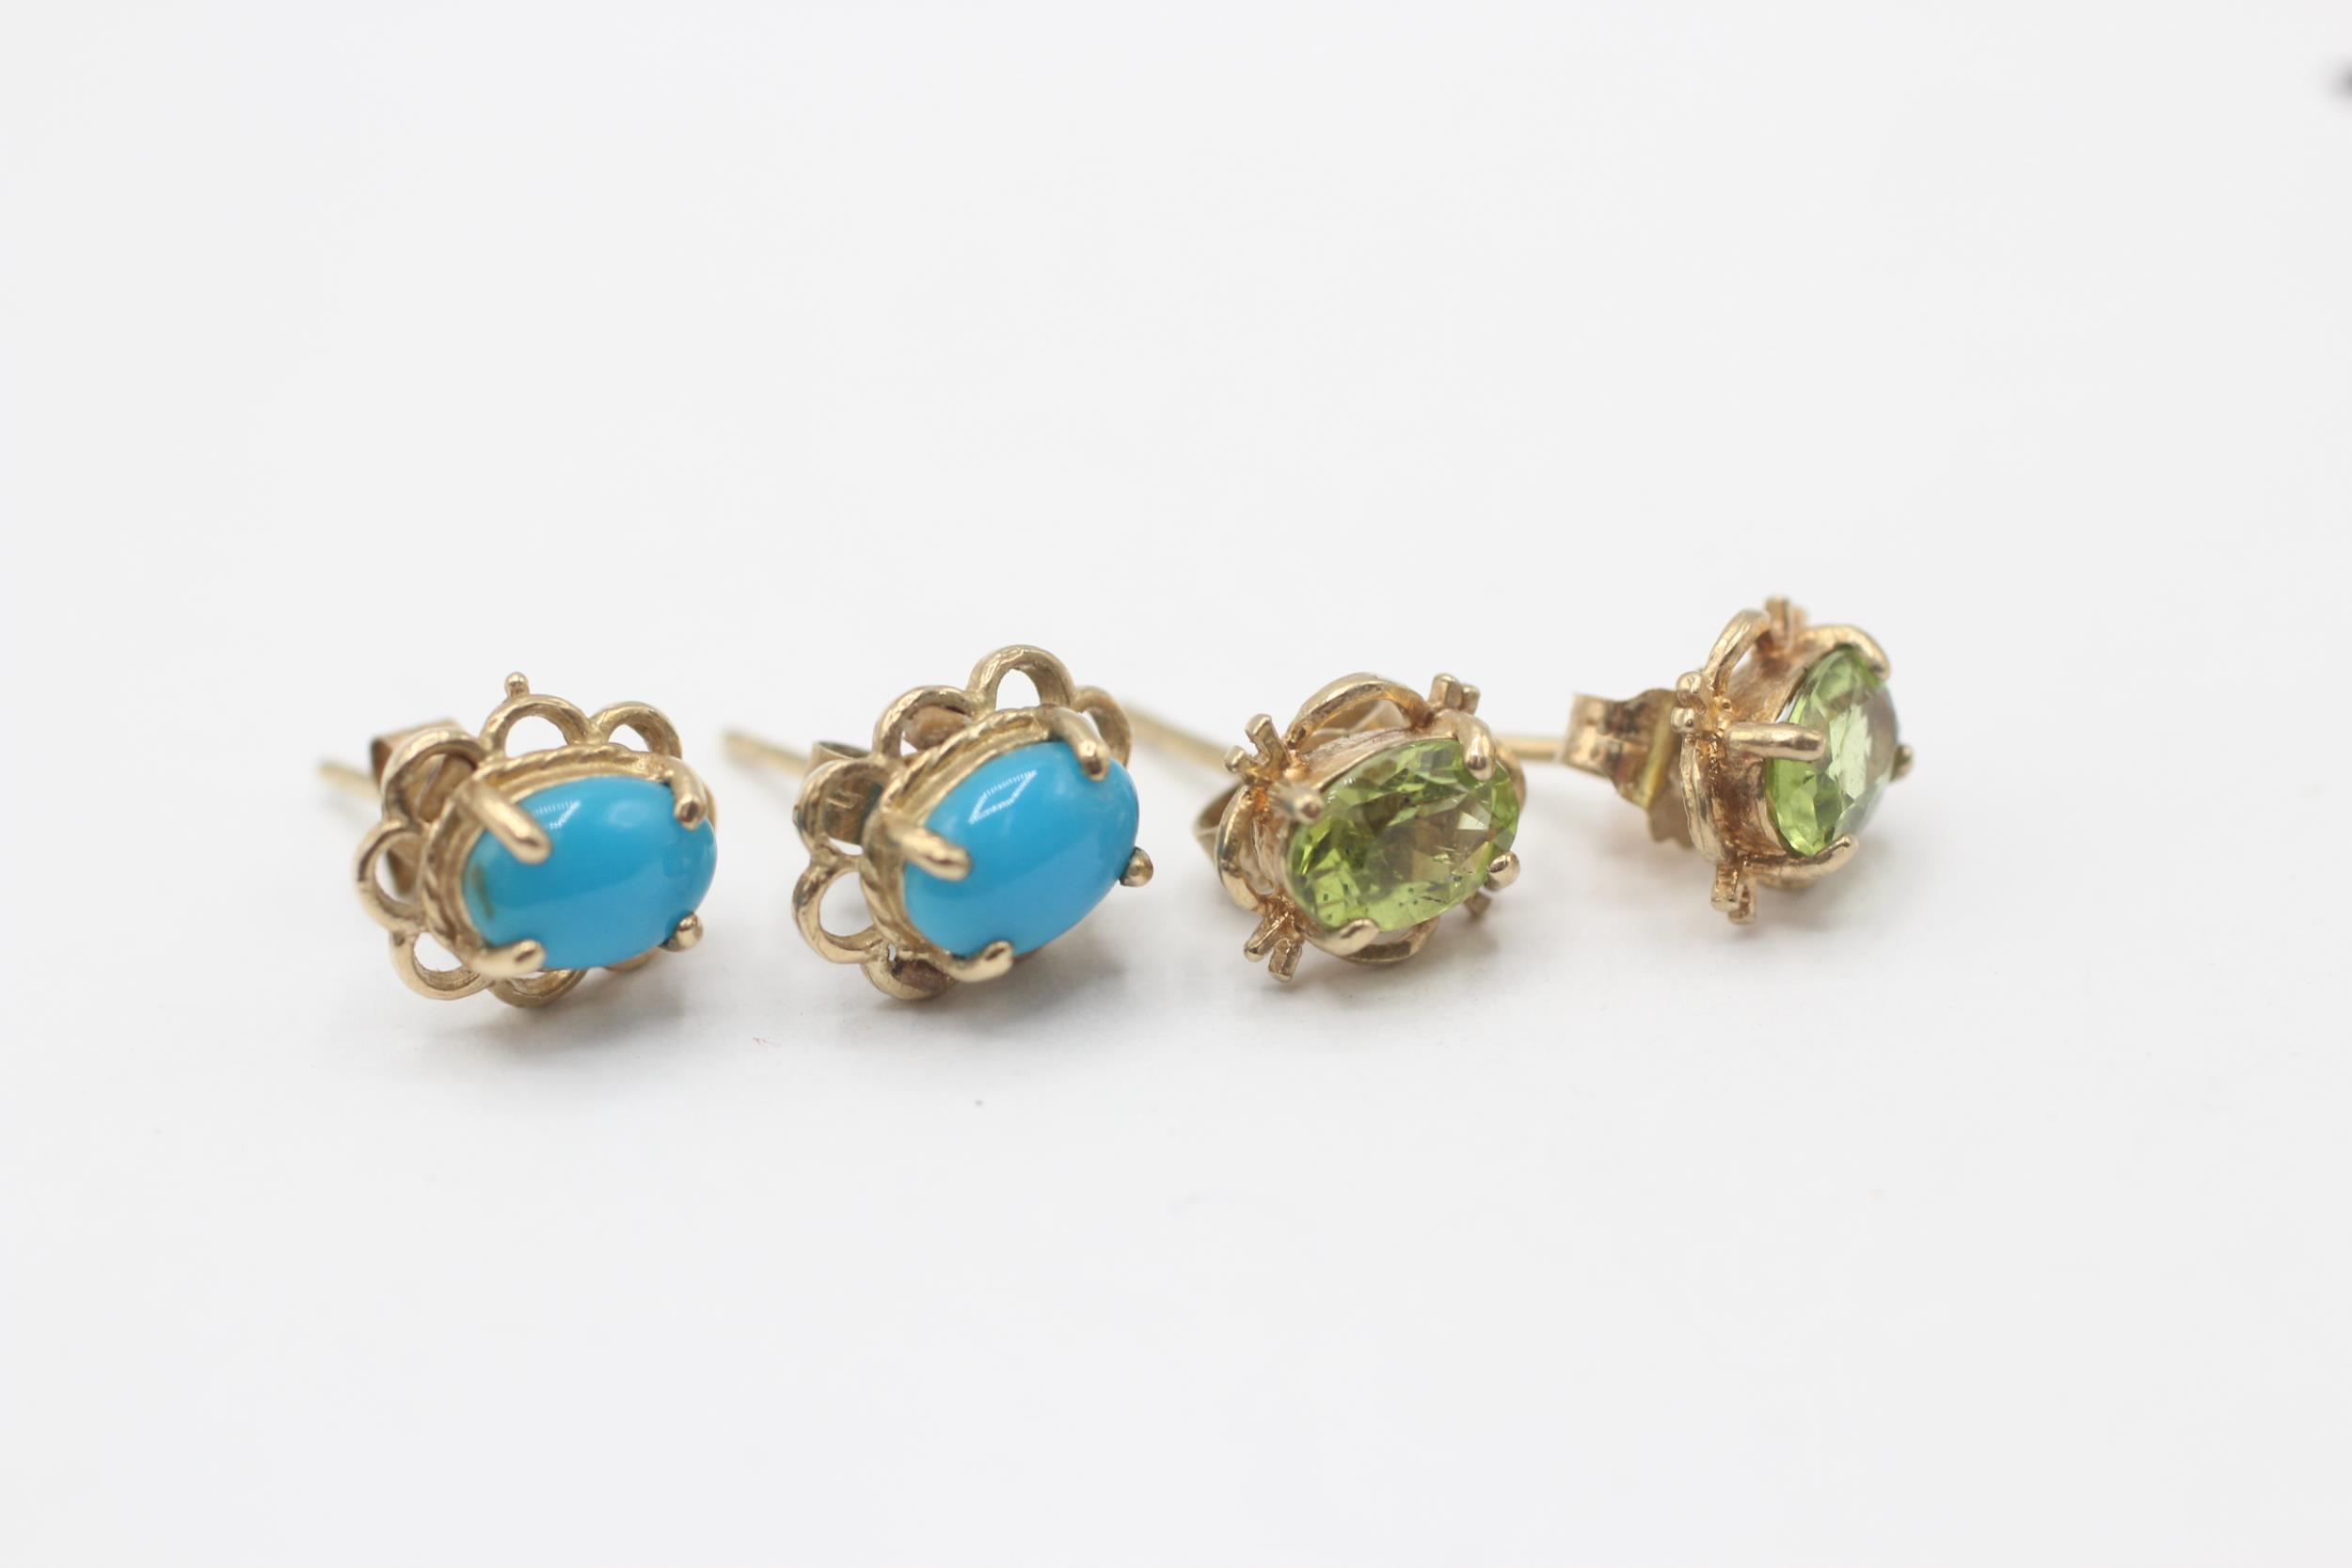 2 x 9ct gold peridot and blue gemstone stud earrings - Image 3 of 4